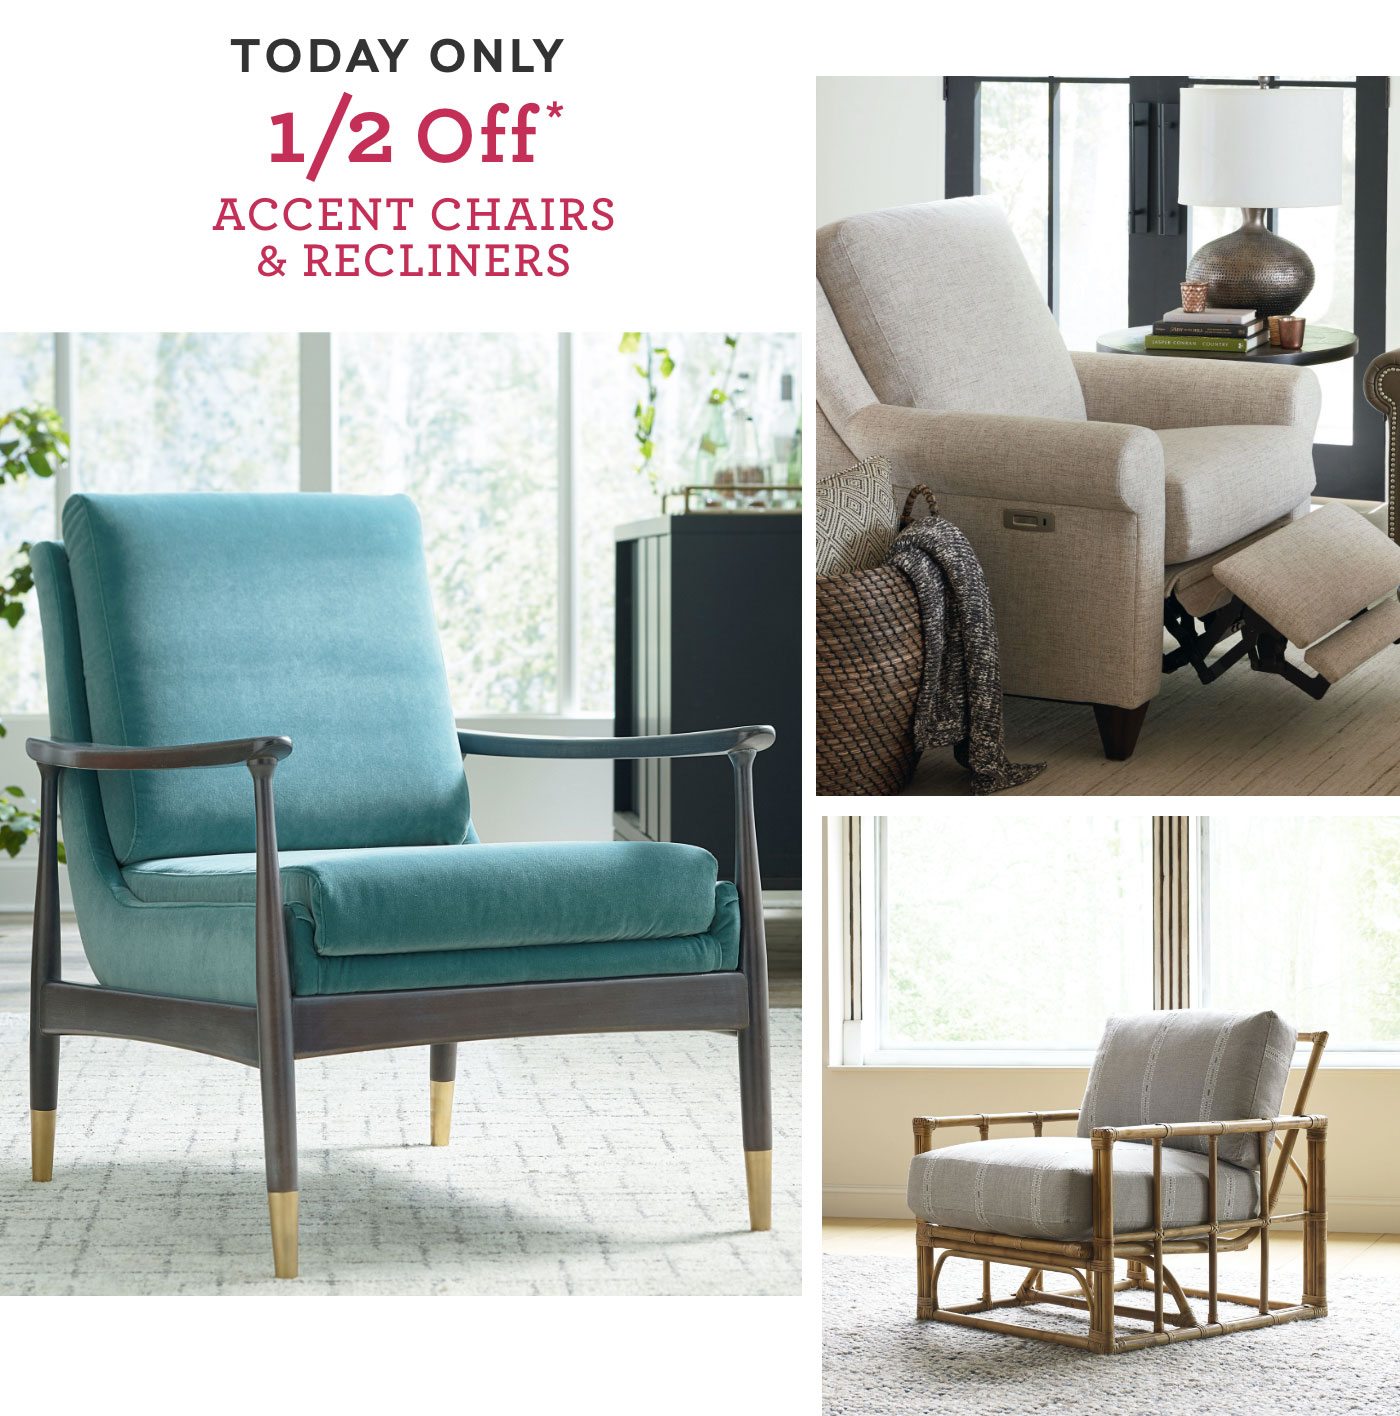 Half off accent chairs and recliners. Shop now.